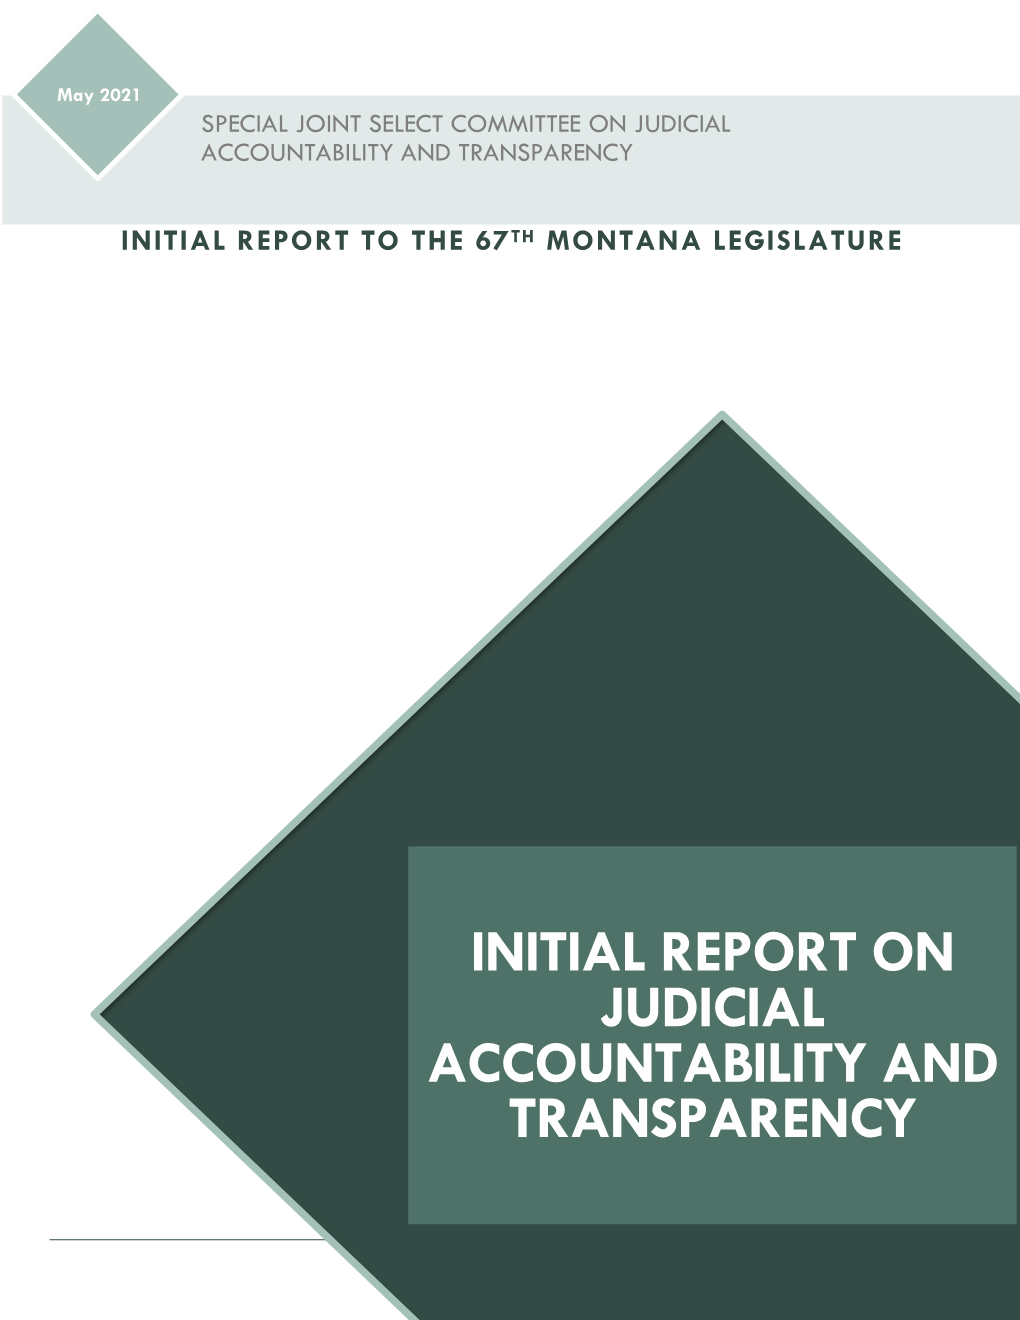 Initial Report on Judicial Accountability and Transparency